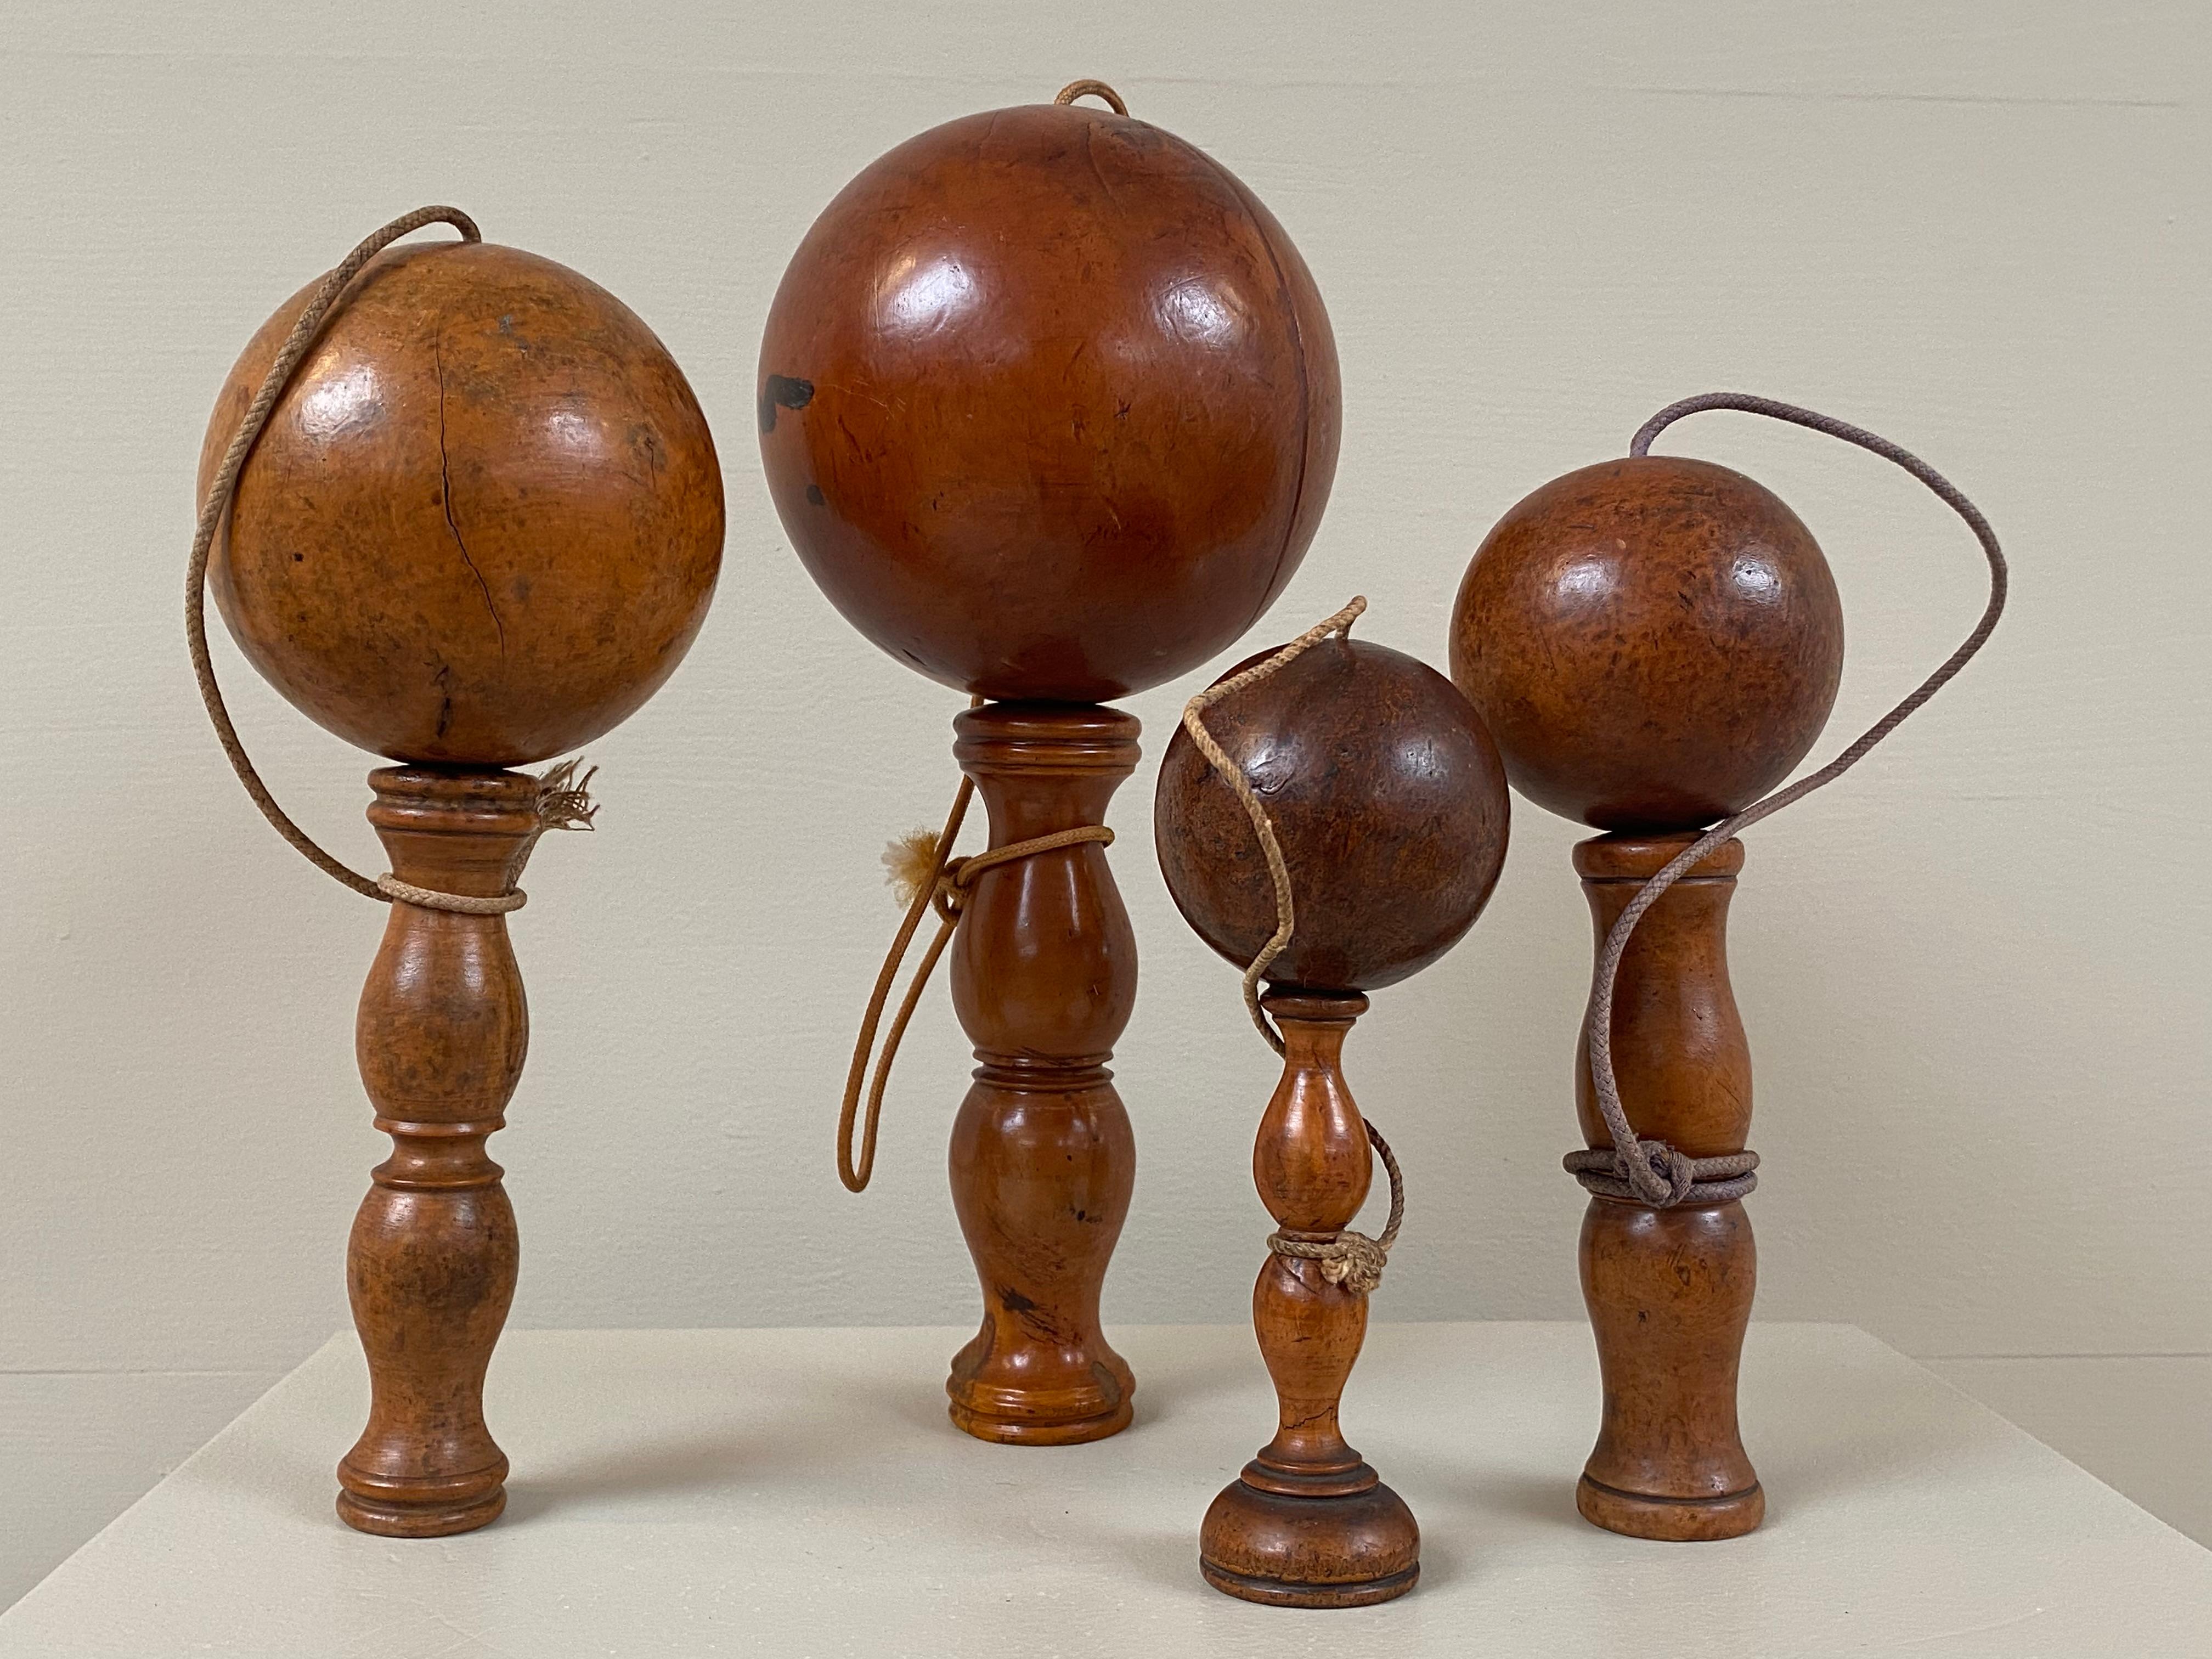 Beautiful set of four antique Bilboquets from France,around 1920,
cup-and-bowl children toys in turned Beechwood, dark tinted,
pretty patina,
a set full of charm and authenticity
warm and worn shine.
 